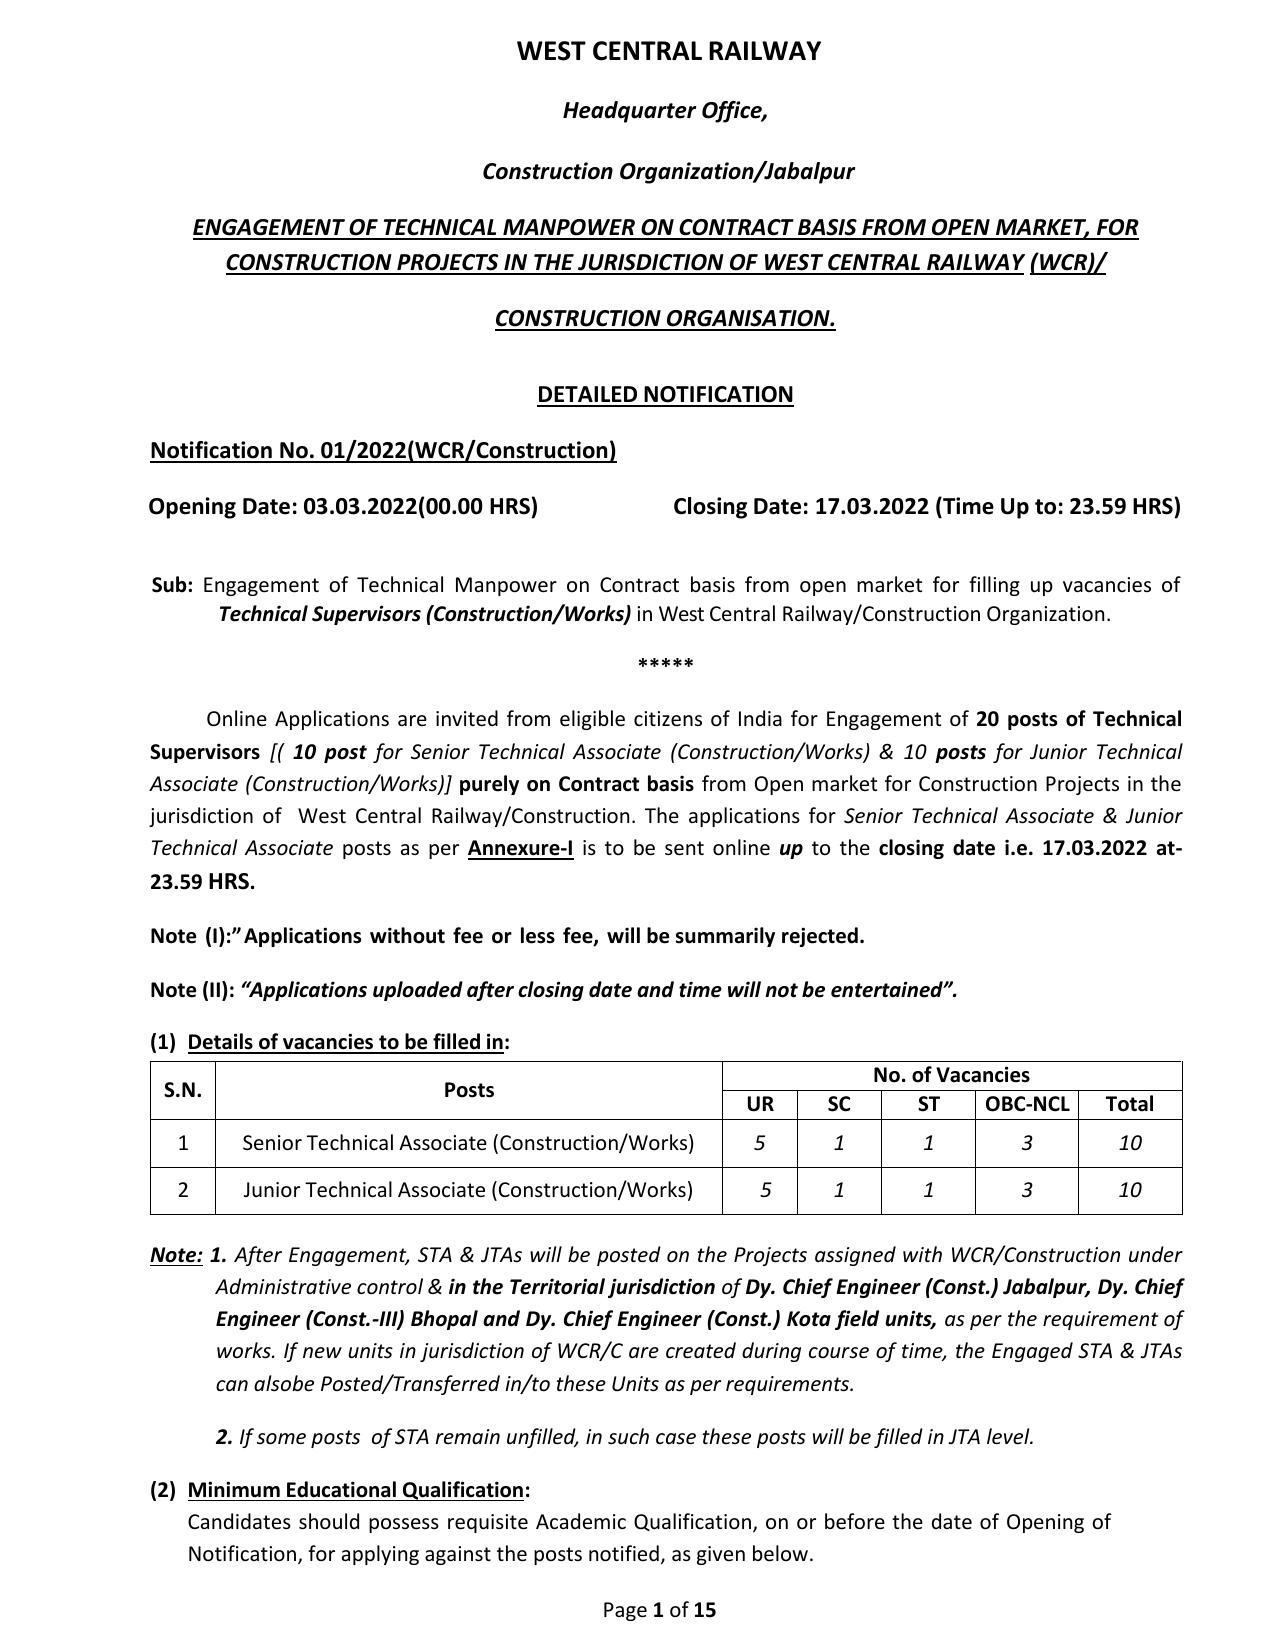 West Central Railway (WCR) Technical Supervisor Recruitment 2023 - Page 1